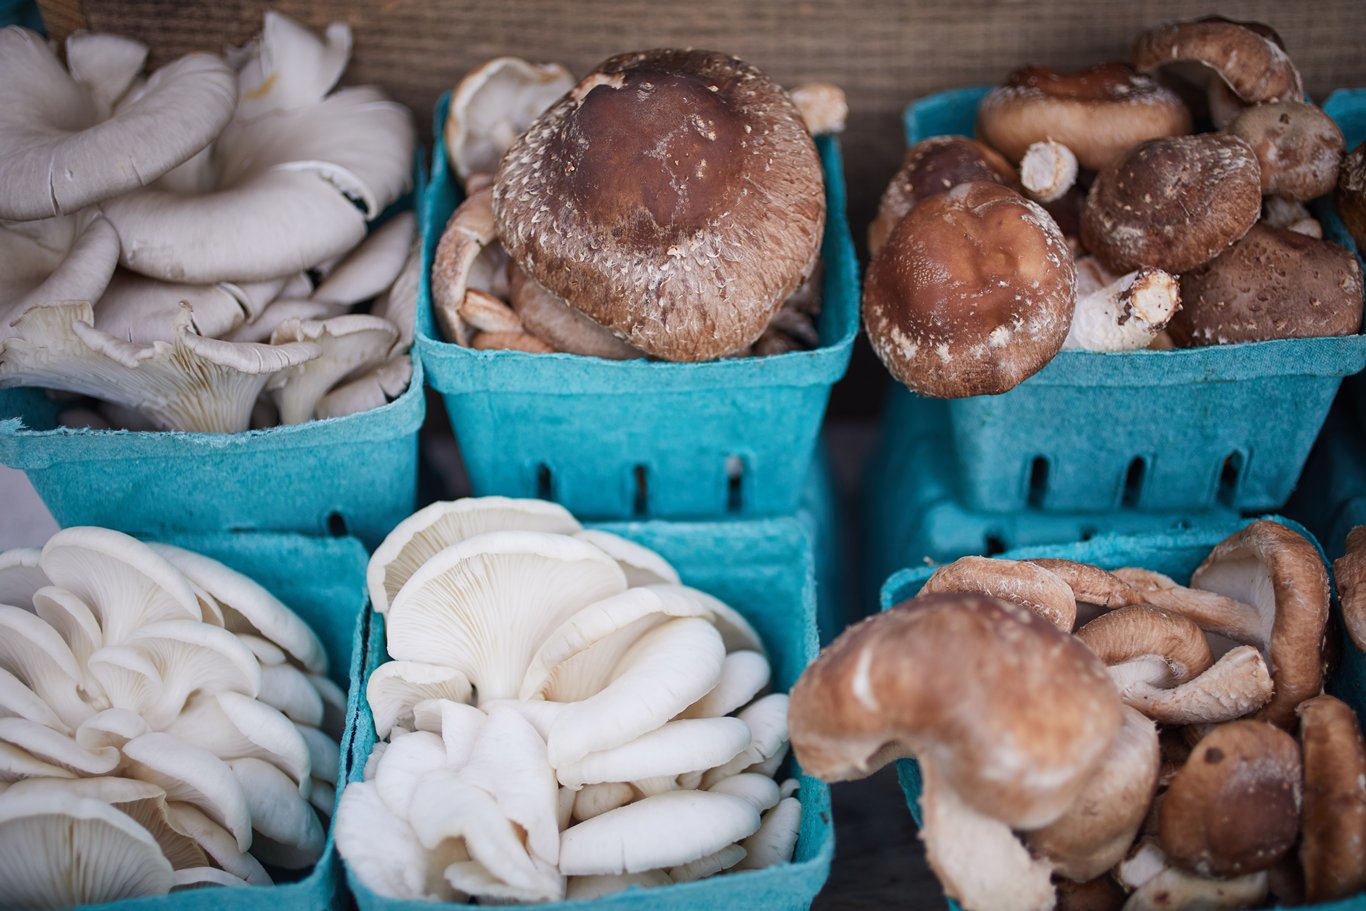 Images from Farmer's Markets in the Hudson Valley, mushrooms